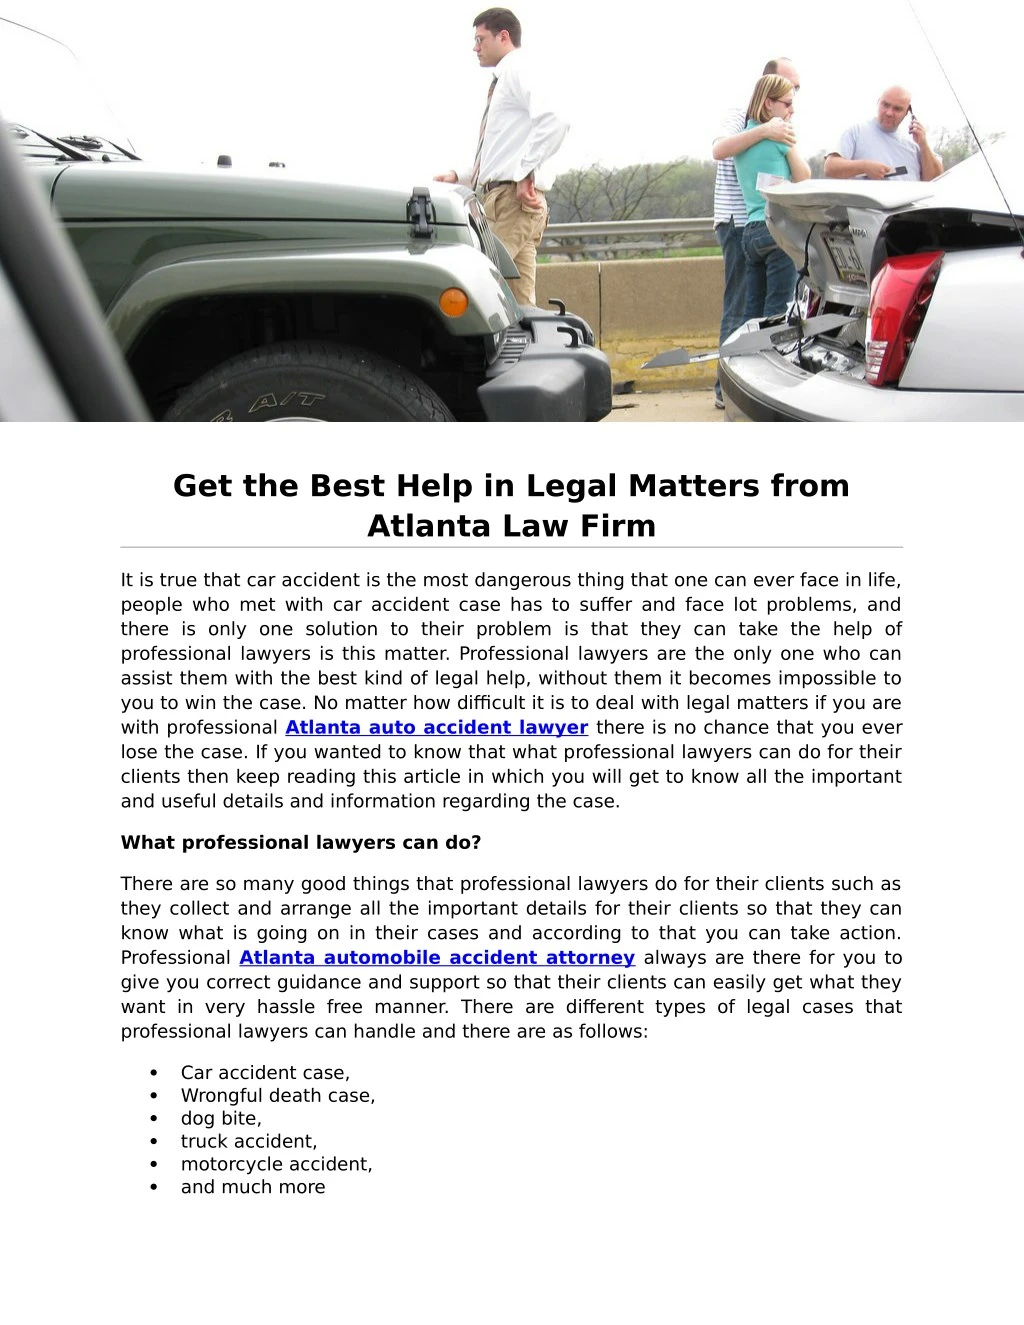 get the best help in legal matters from atlanta